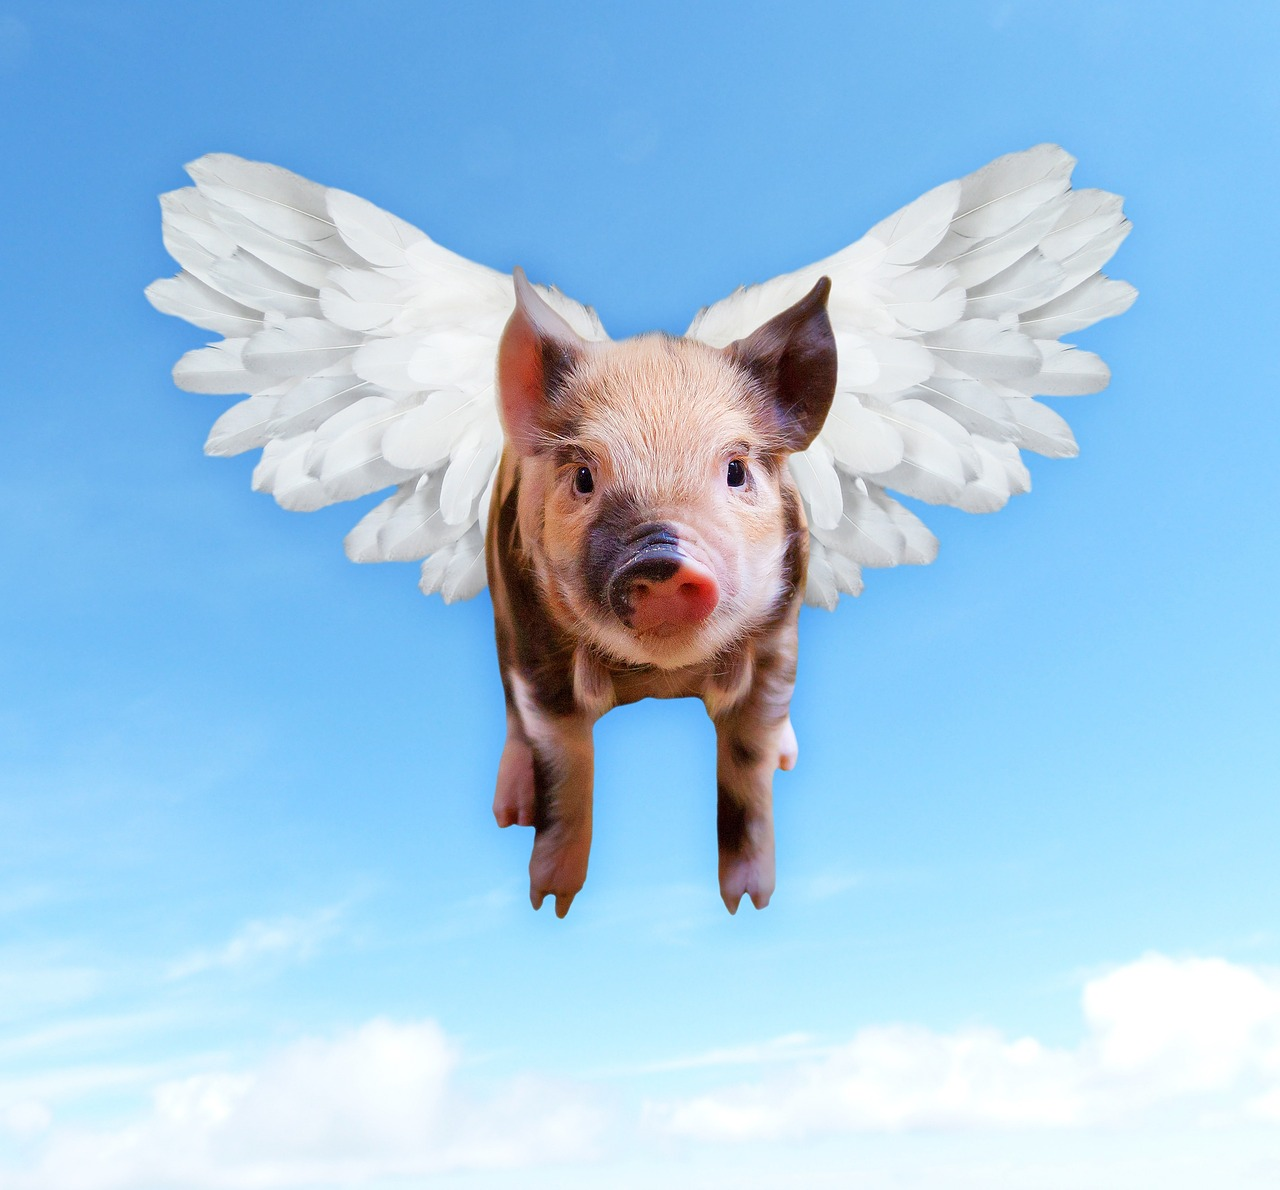 Pigs are flying - Steemit.